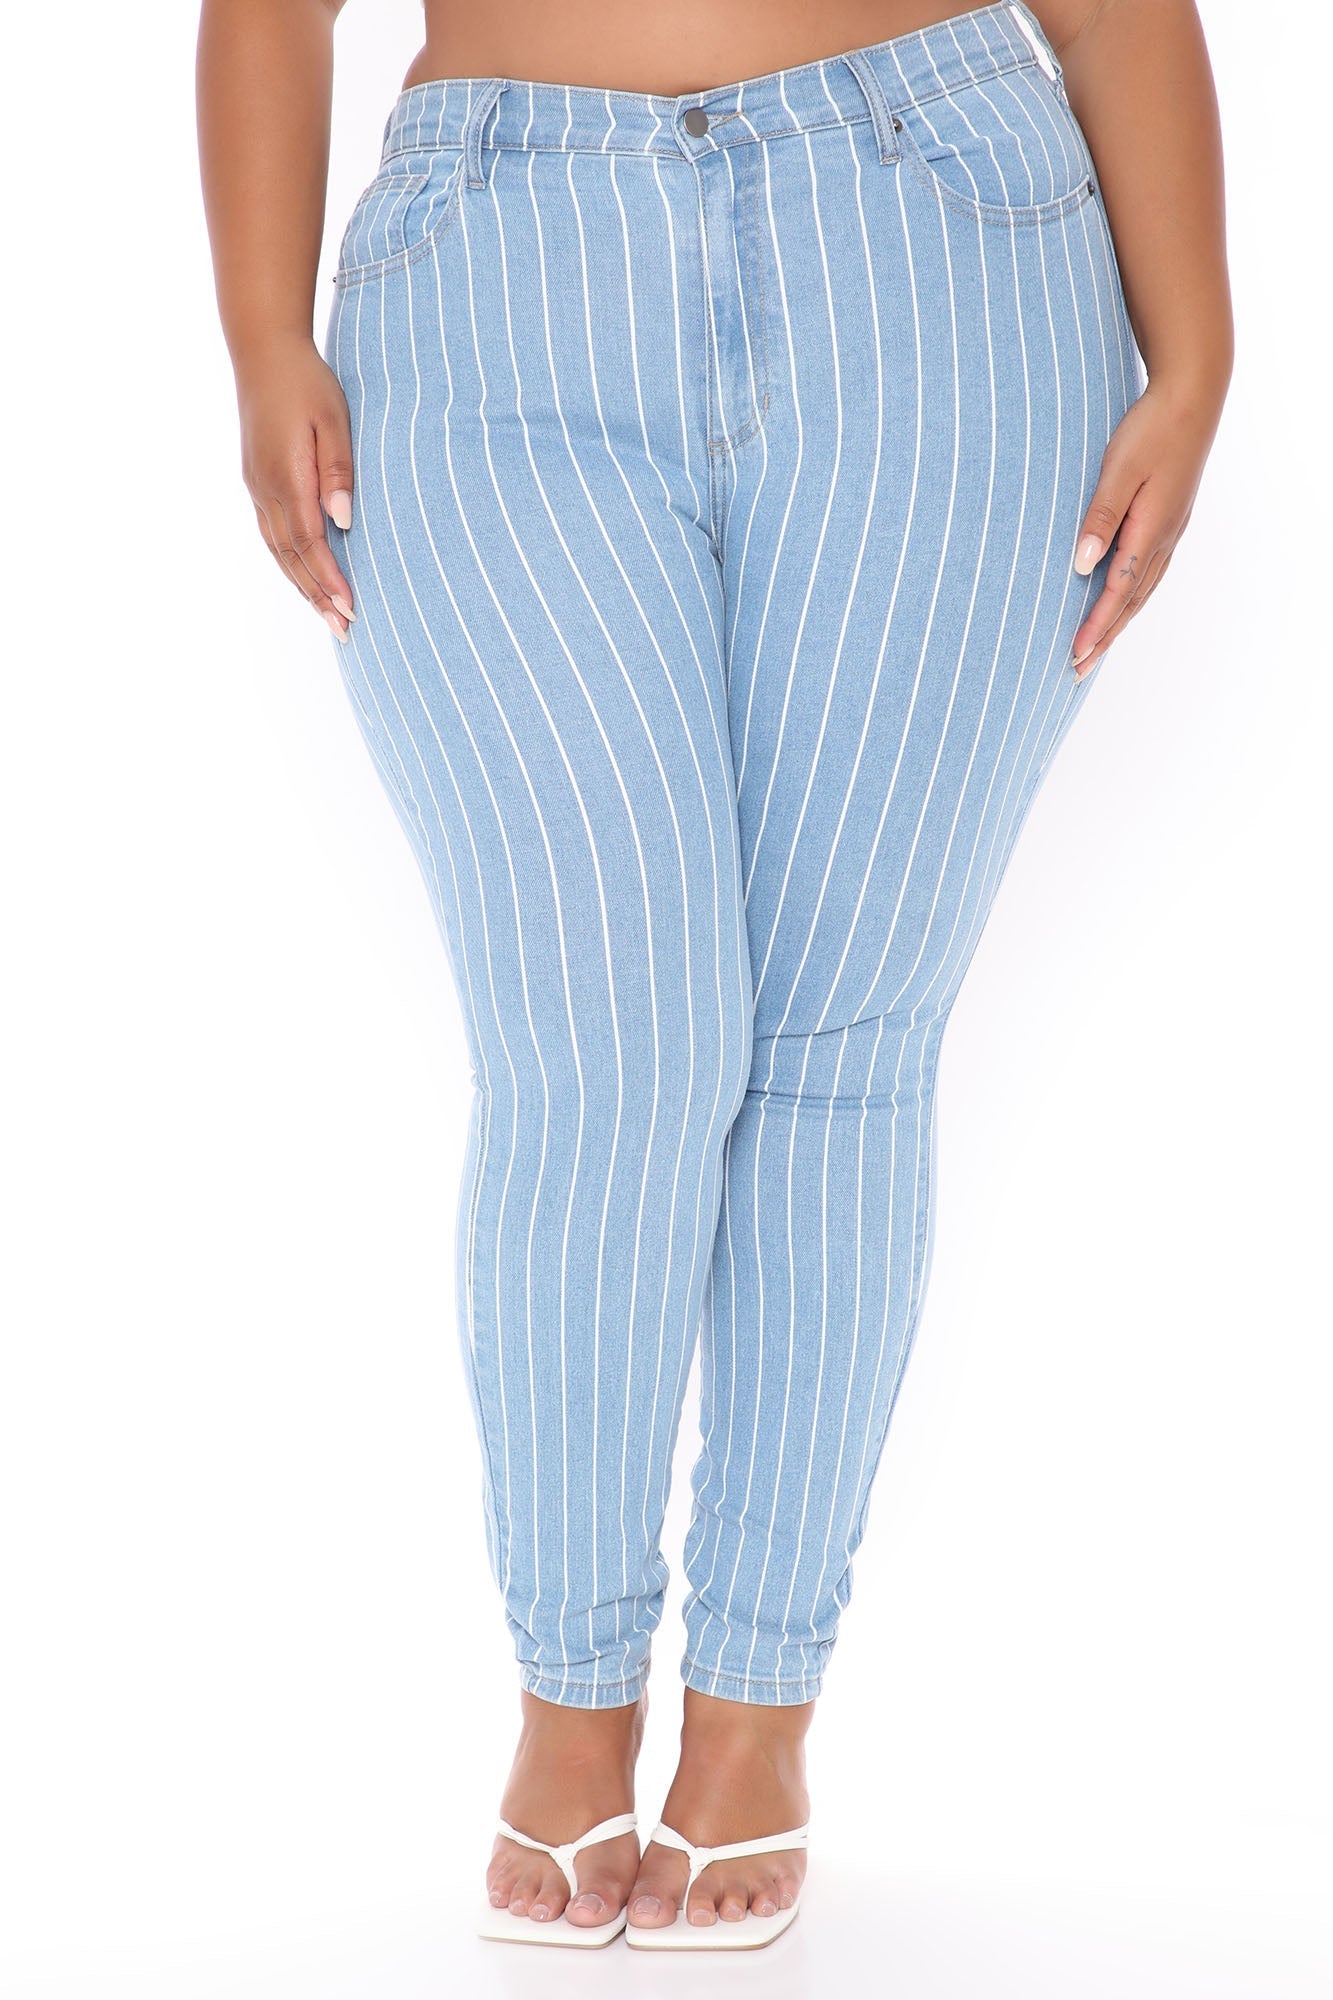 You've Crossed The Line Striped Skinny Jeans - Medium Blue Wash